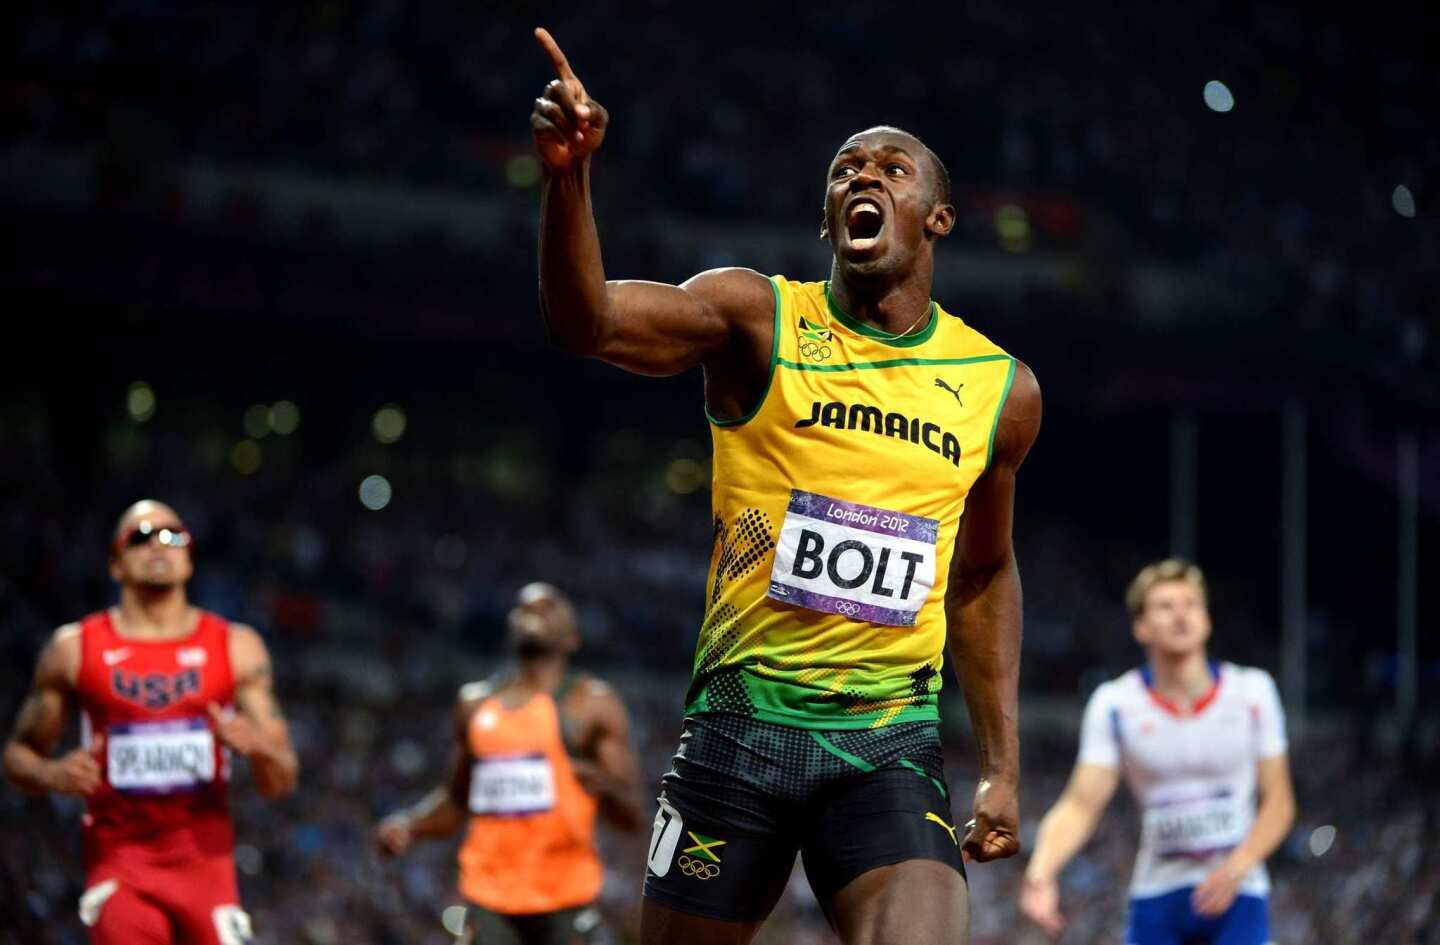 Jamaica's Usain Bolt celebrates his gold medal win in the men's 200 meters at the 2012 London Olympics on Thursday.